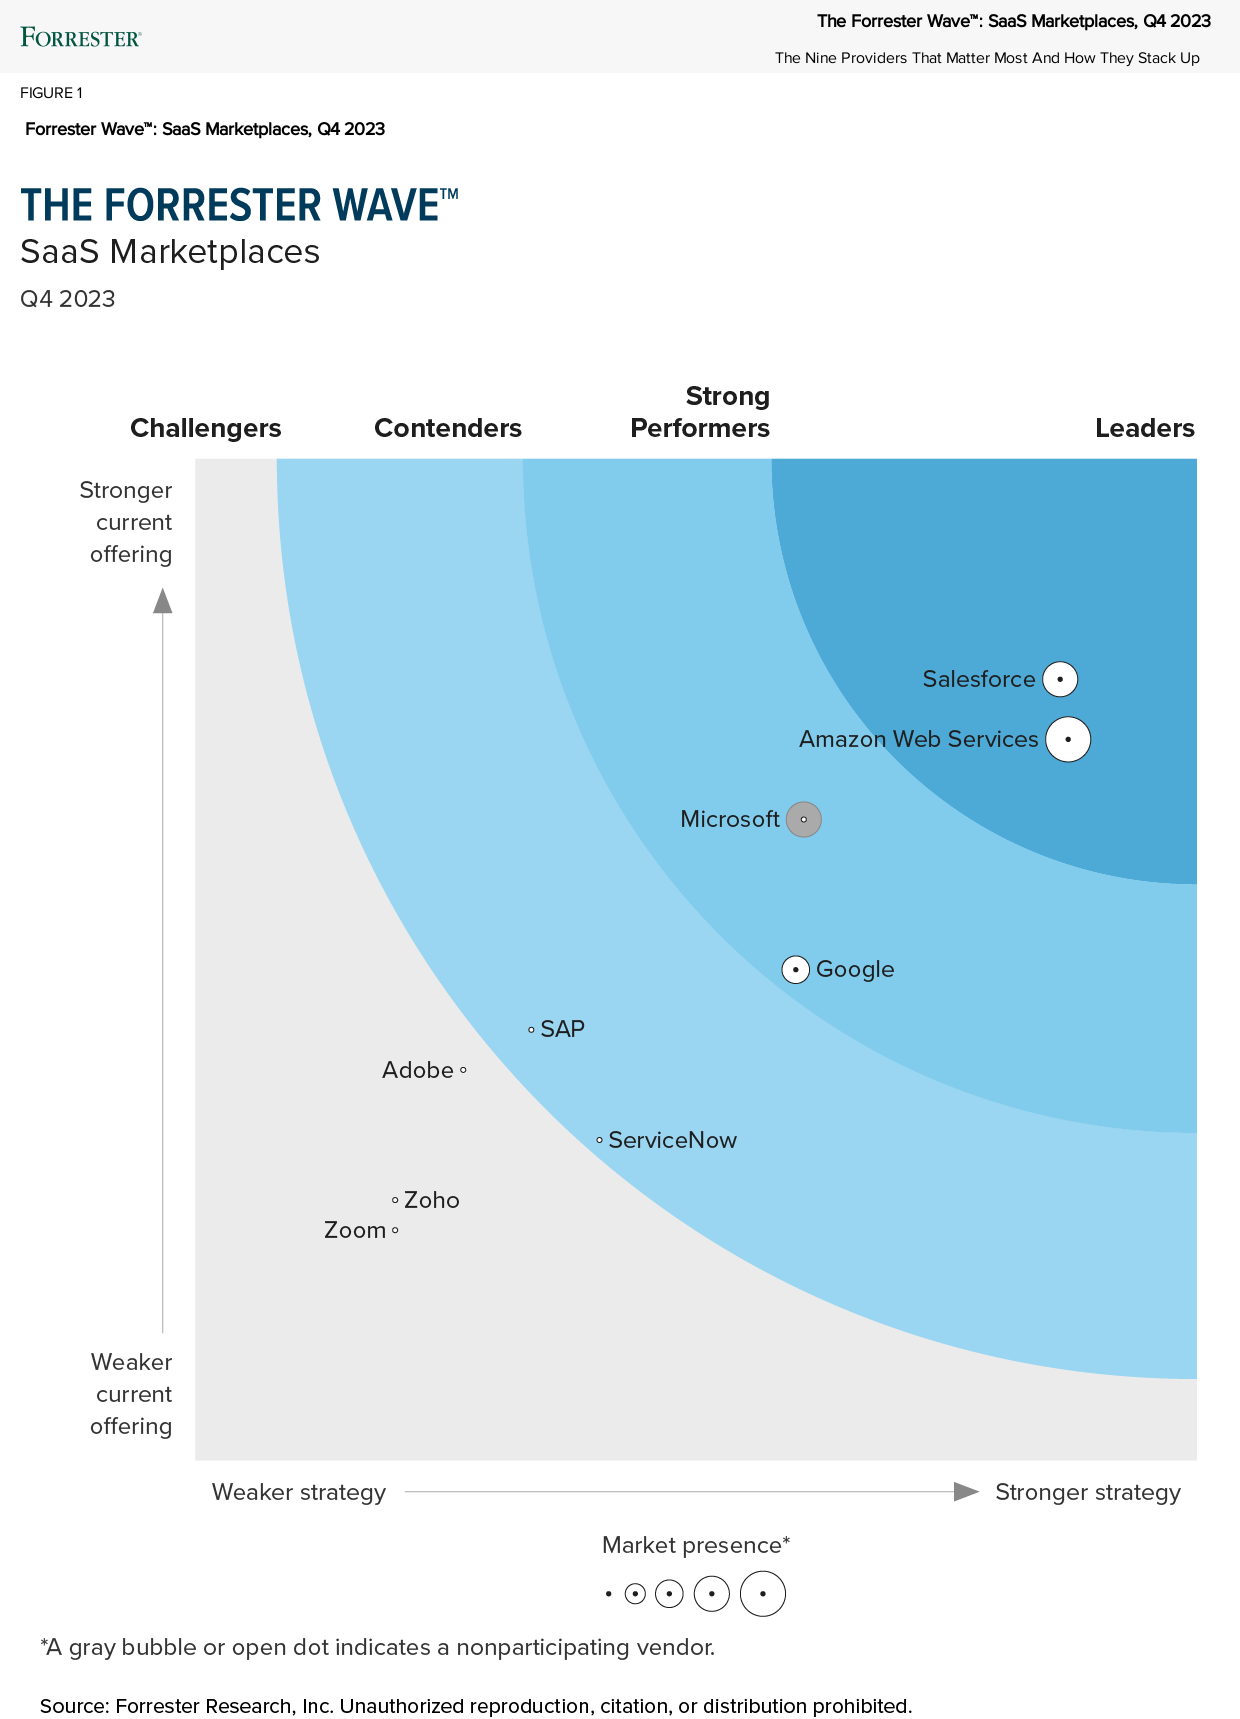 The Forrester Wave: SaaS Marketplaces, Q4 2023